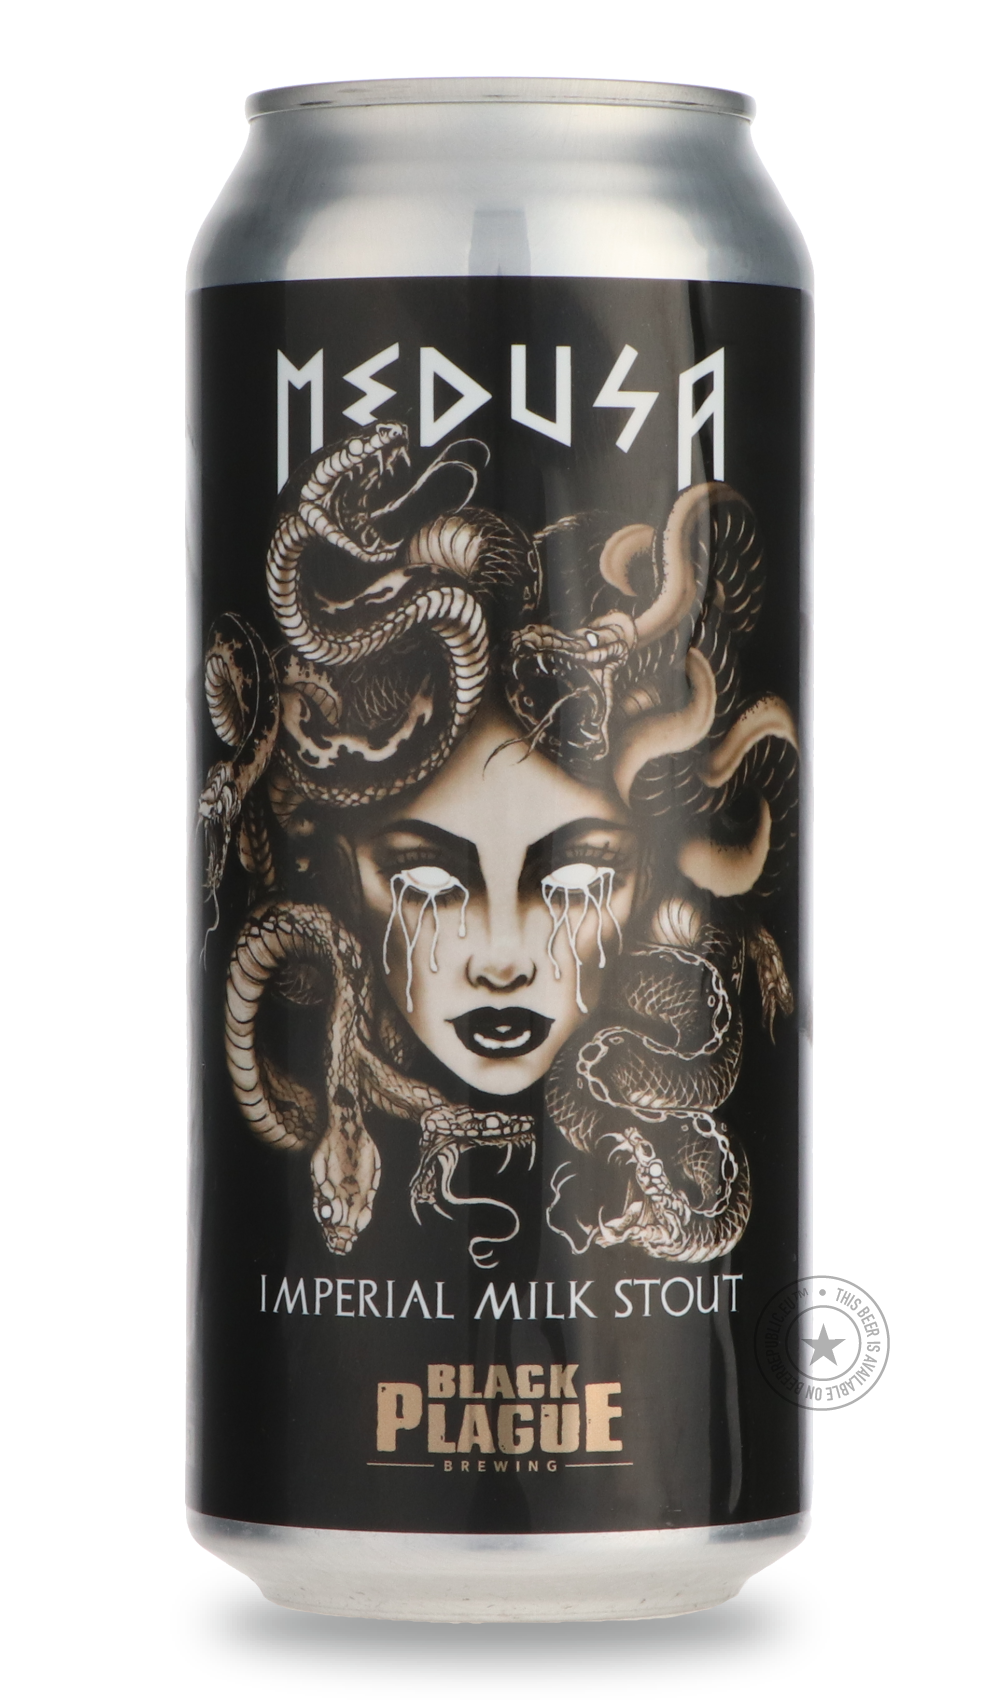 -Black Plague- Medusa-Stout & Porter- Only @ Beer Republic - The best online beer store for American & Canadian craft beer - Buy beer online from the USA and Canada - Bier online kopen - Amerikaans bier kopen - Craft beer store - Craft beer kopen - Amerikanisch bier kaufen - Bier online kaufen - Acheter biere online - IPA - Stout - Porter - New England IPA - Hazy IPA - Imperial Stout - Barrel Aged - Barrel Aged Imperial Stout - Brown - Dark beer - Blond - Blonde - Pilsner - Lager - Wheat - Weizen - Amber - 